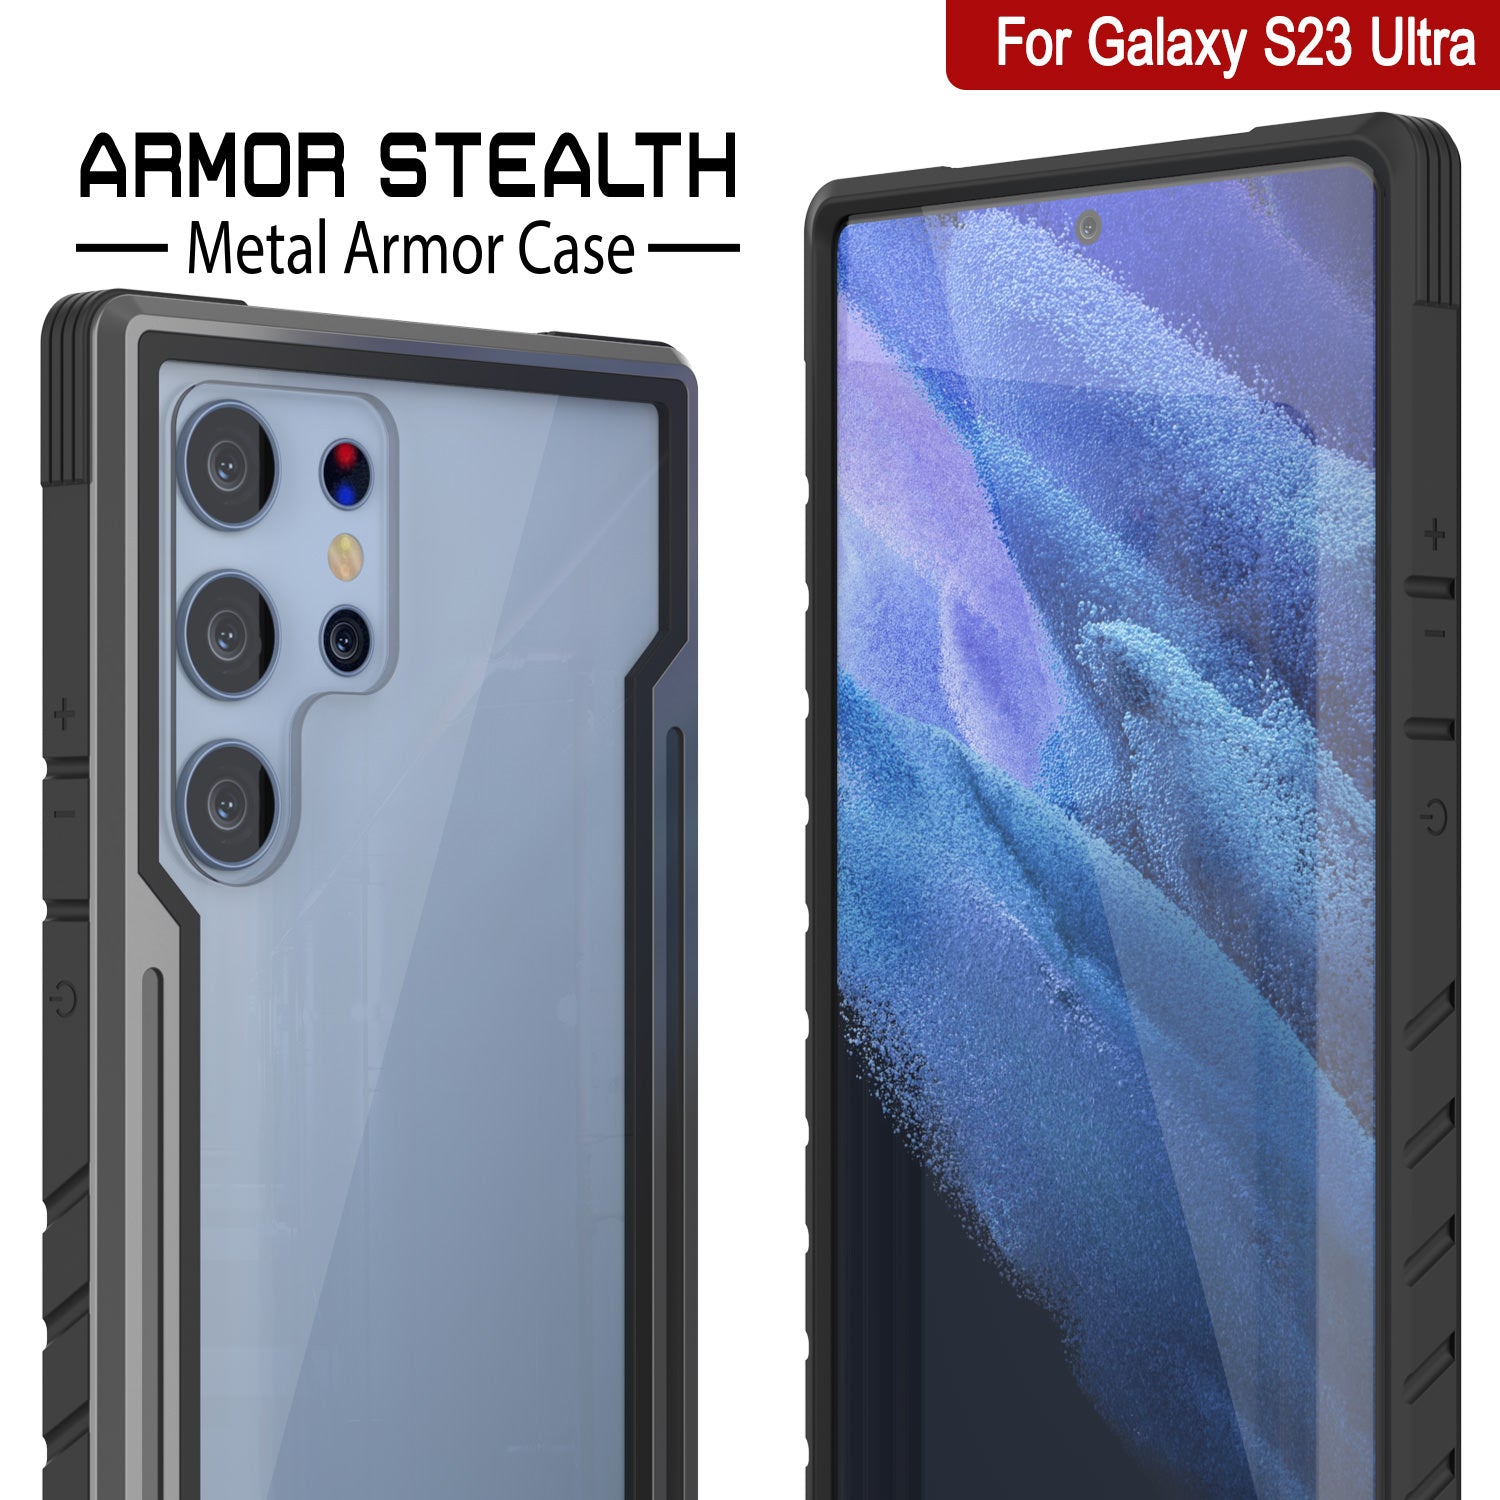 Punkcase S23 Ultra Armor Stealth Case Protective Military Grade Multilayer Cover [Grey-Black]